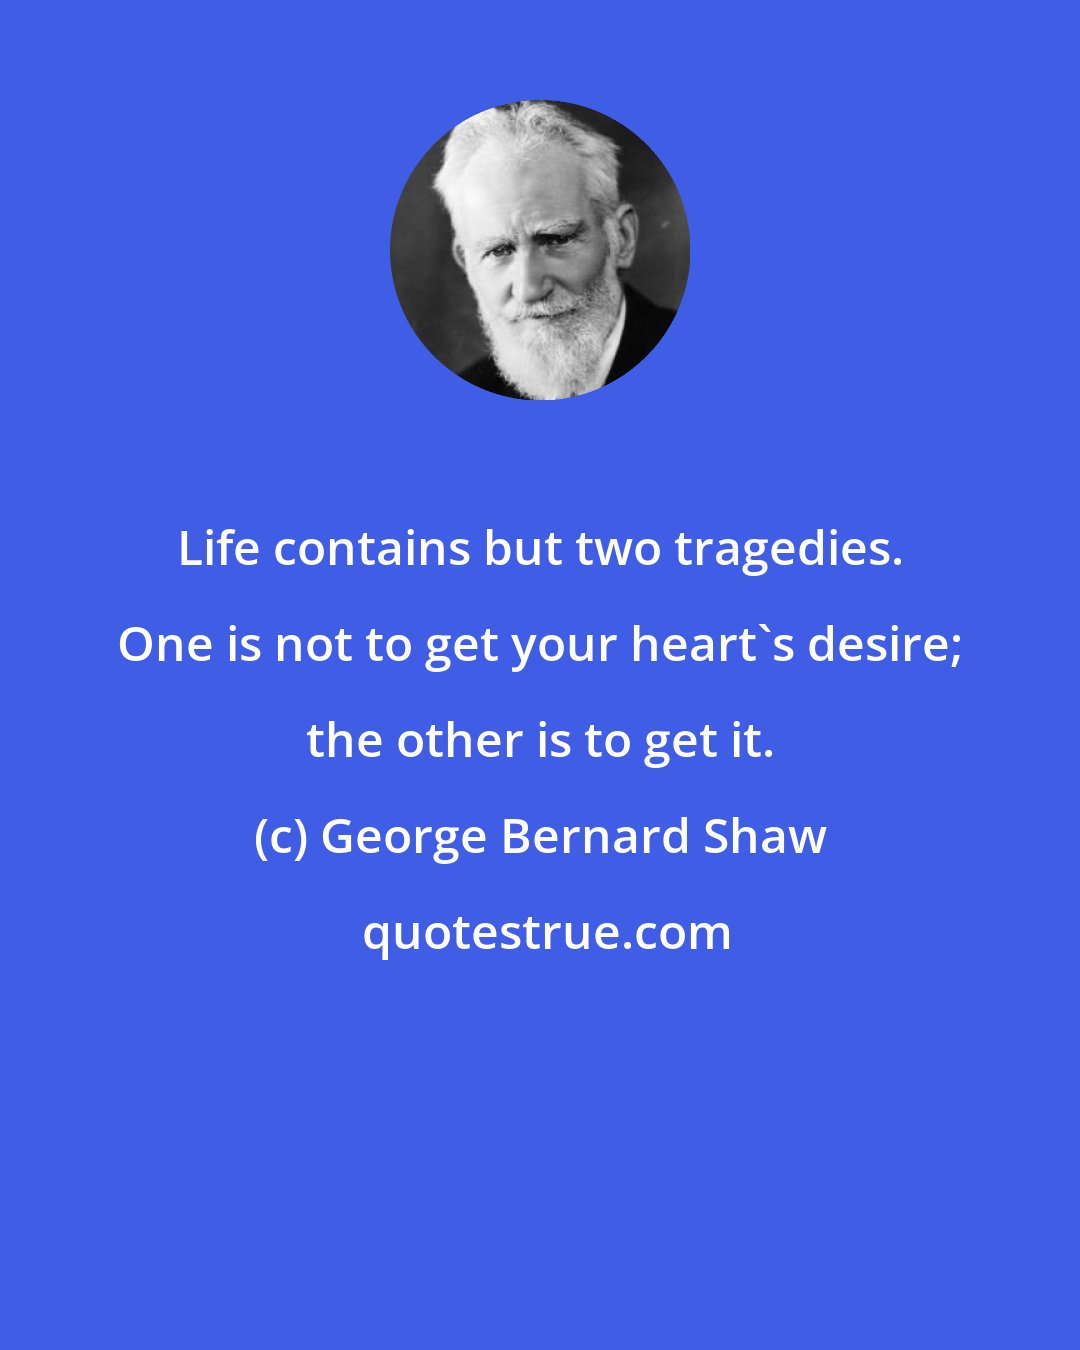 George Bernard Shaw: Life contains but two tragedies. One is not to get your heart's desire; the other is to get it.